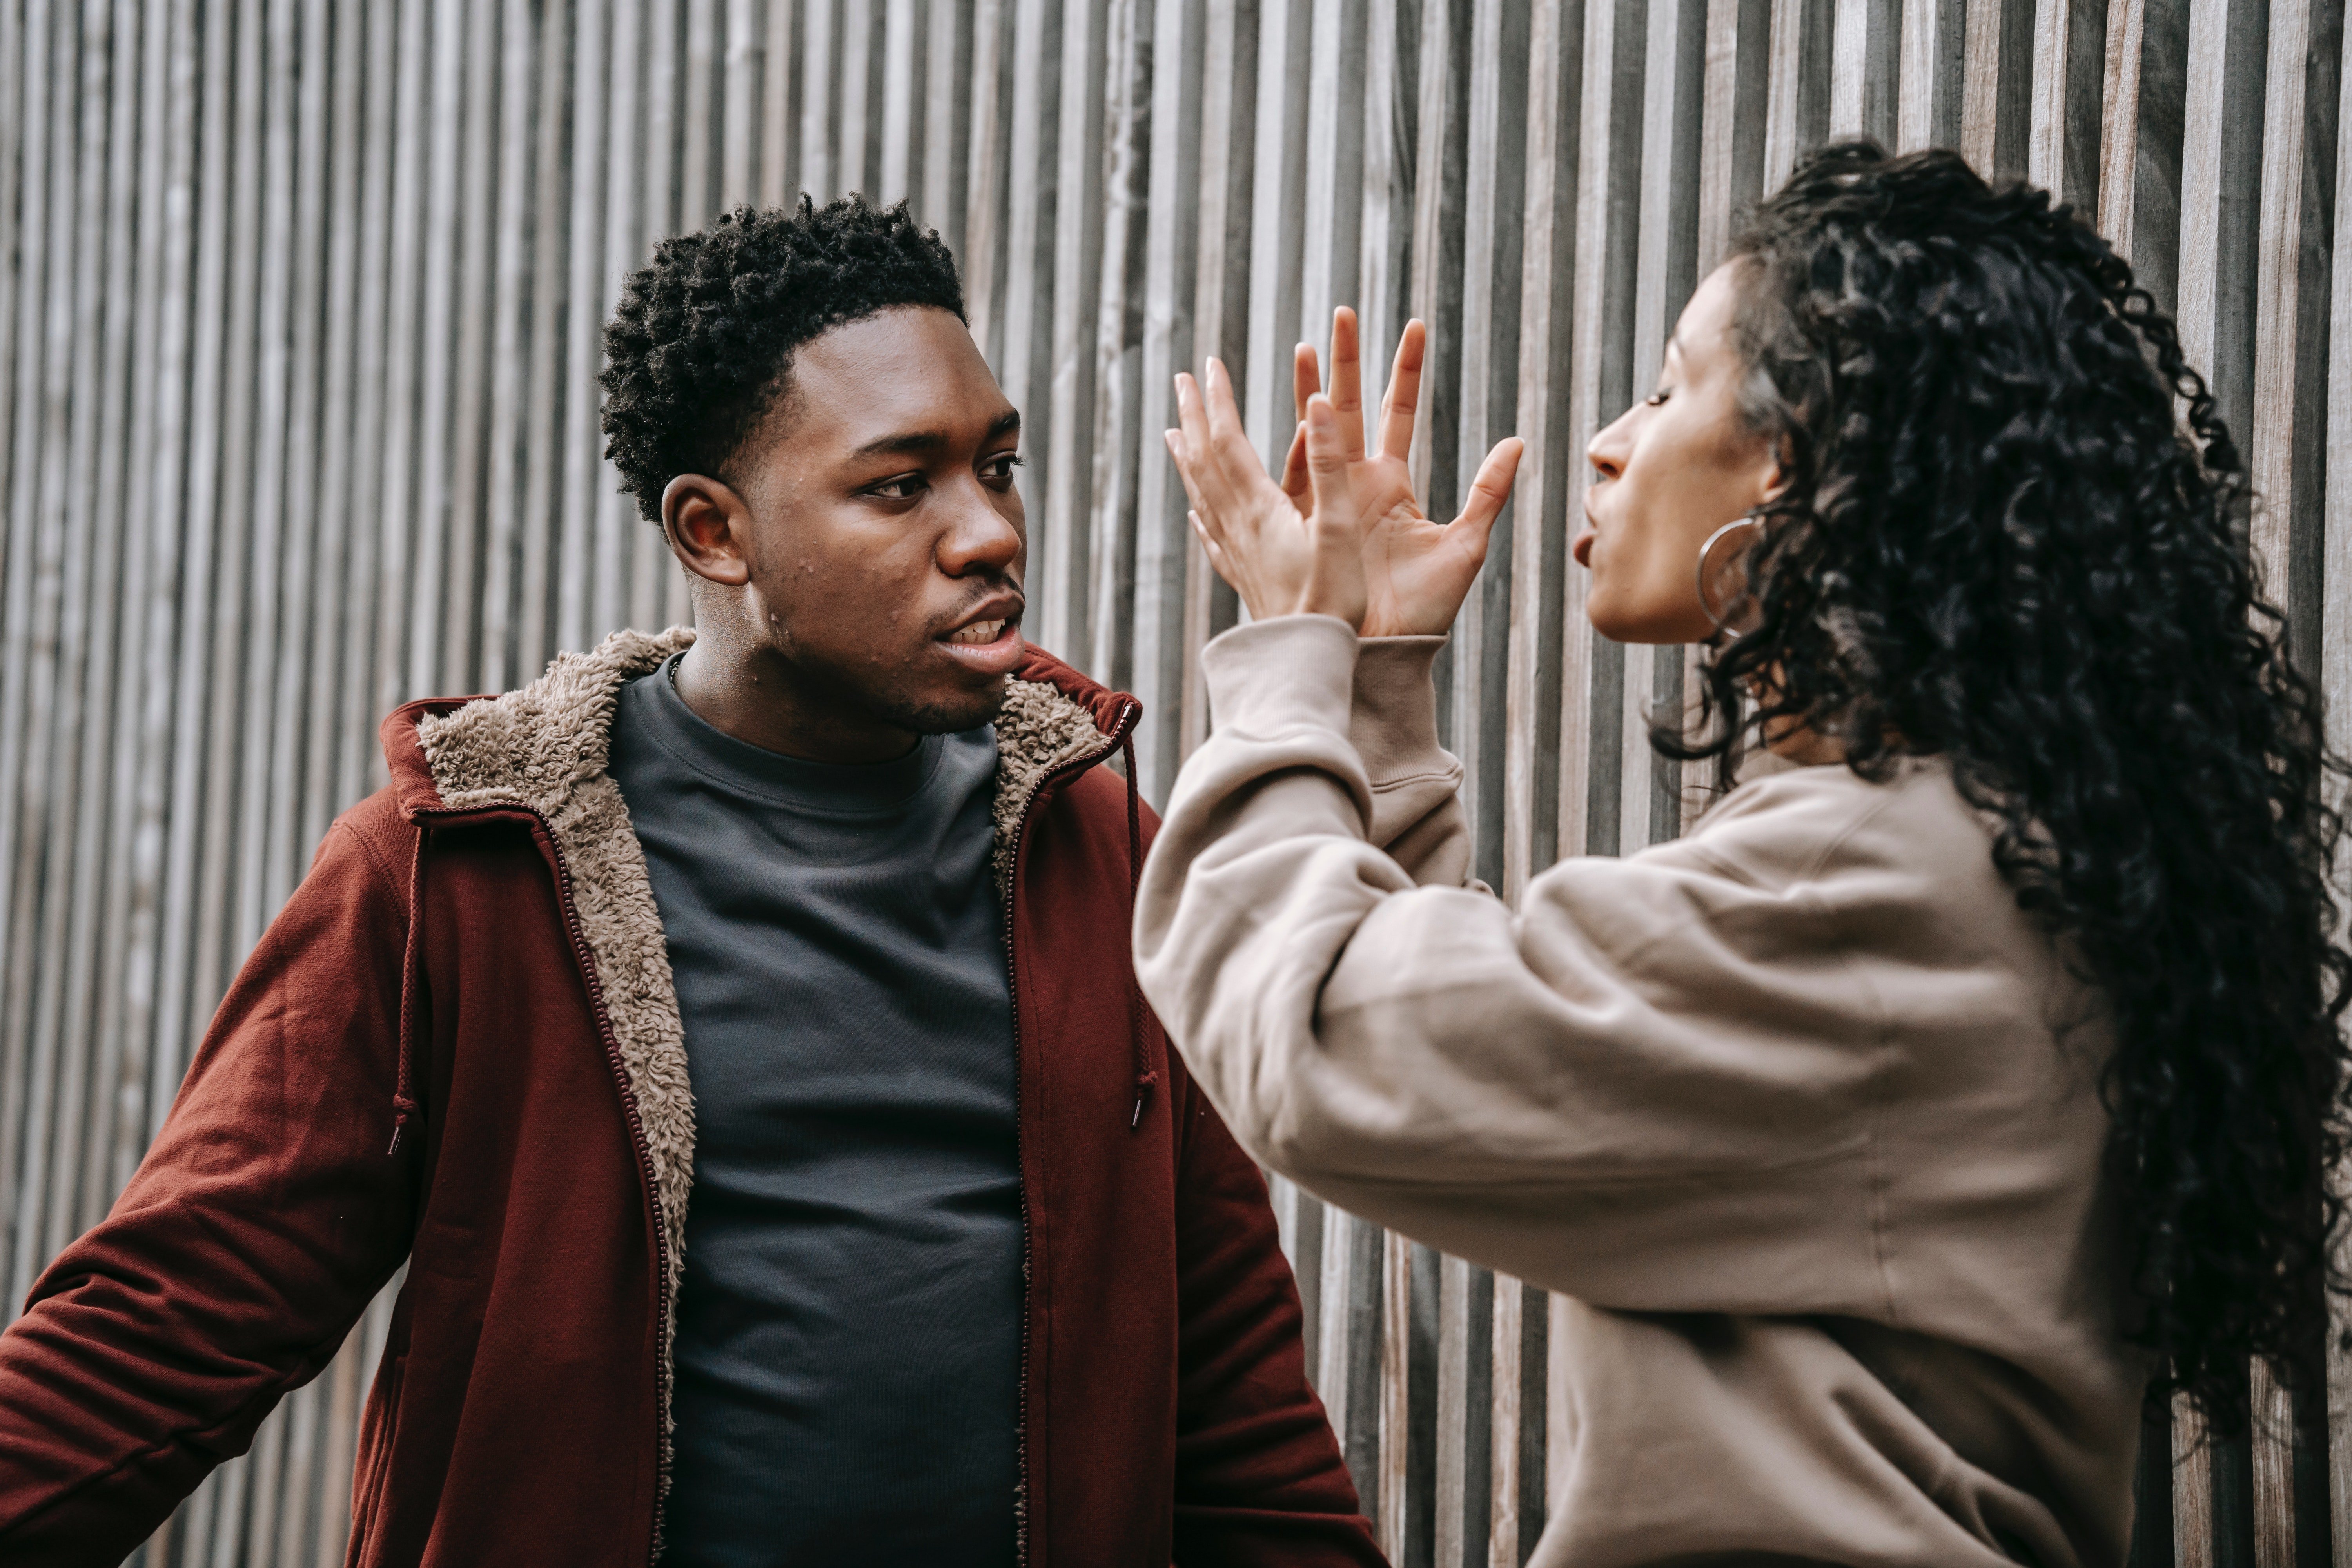 Young man and woman arguing | Source: Pexels